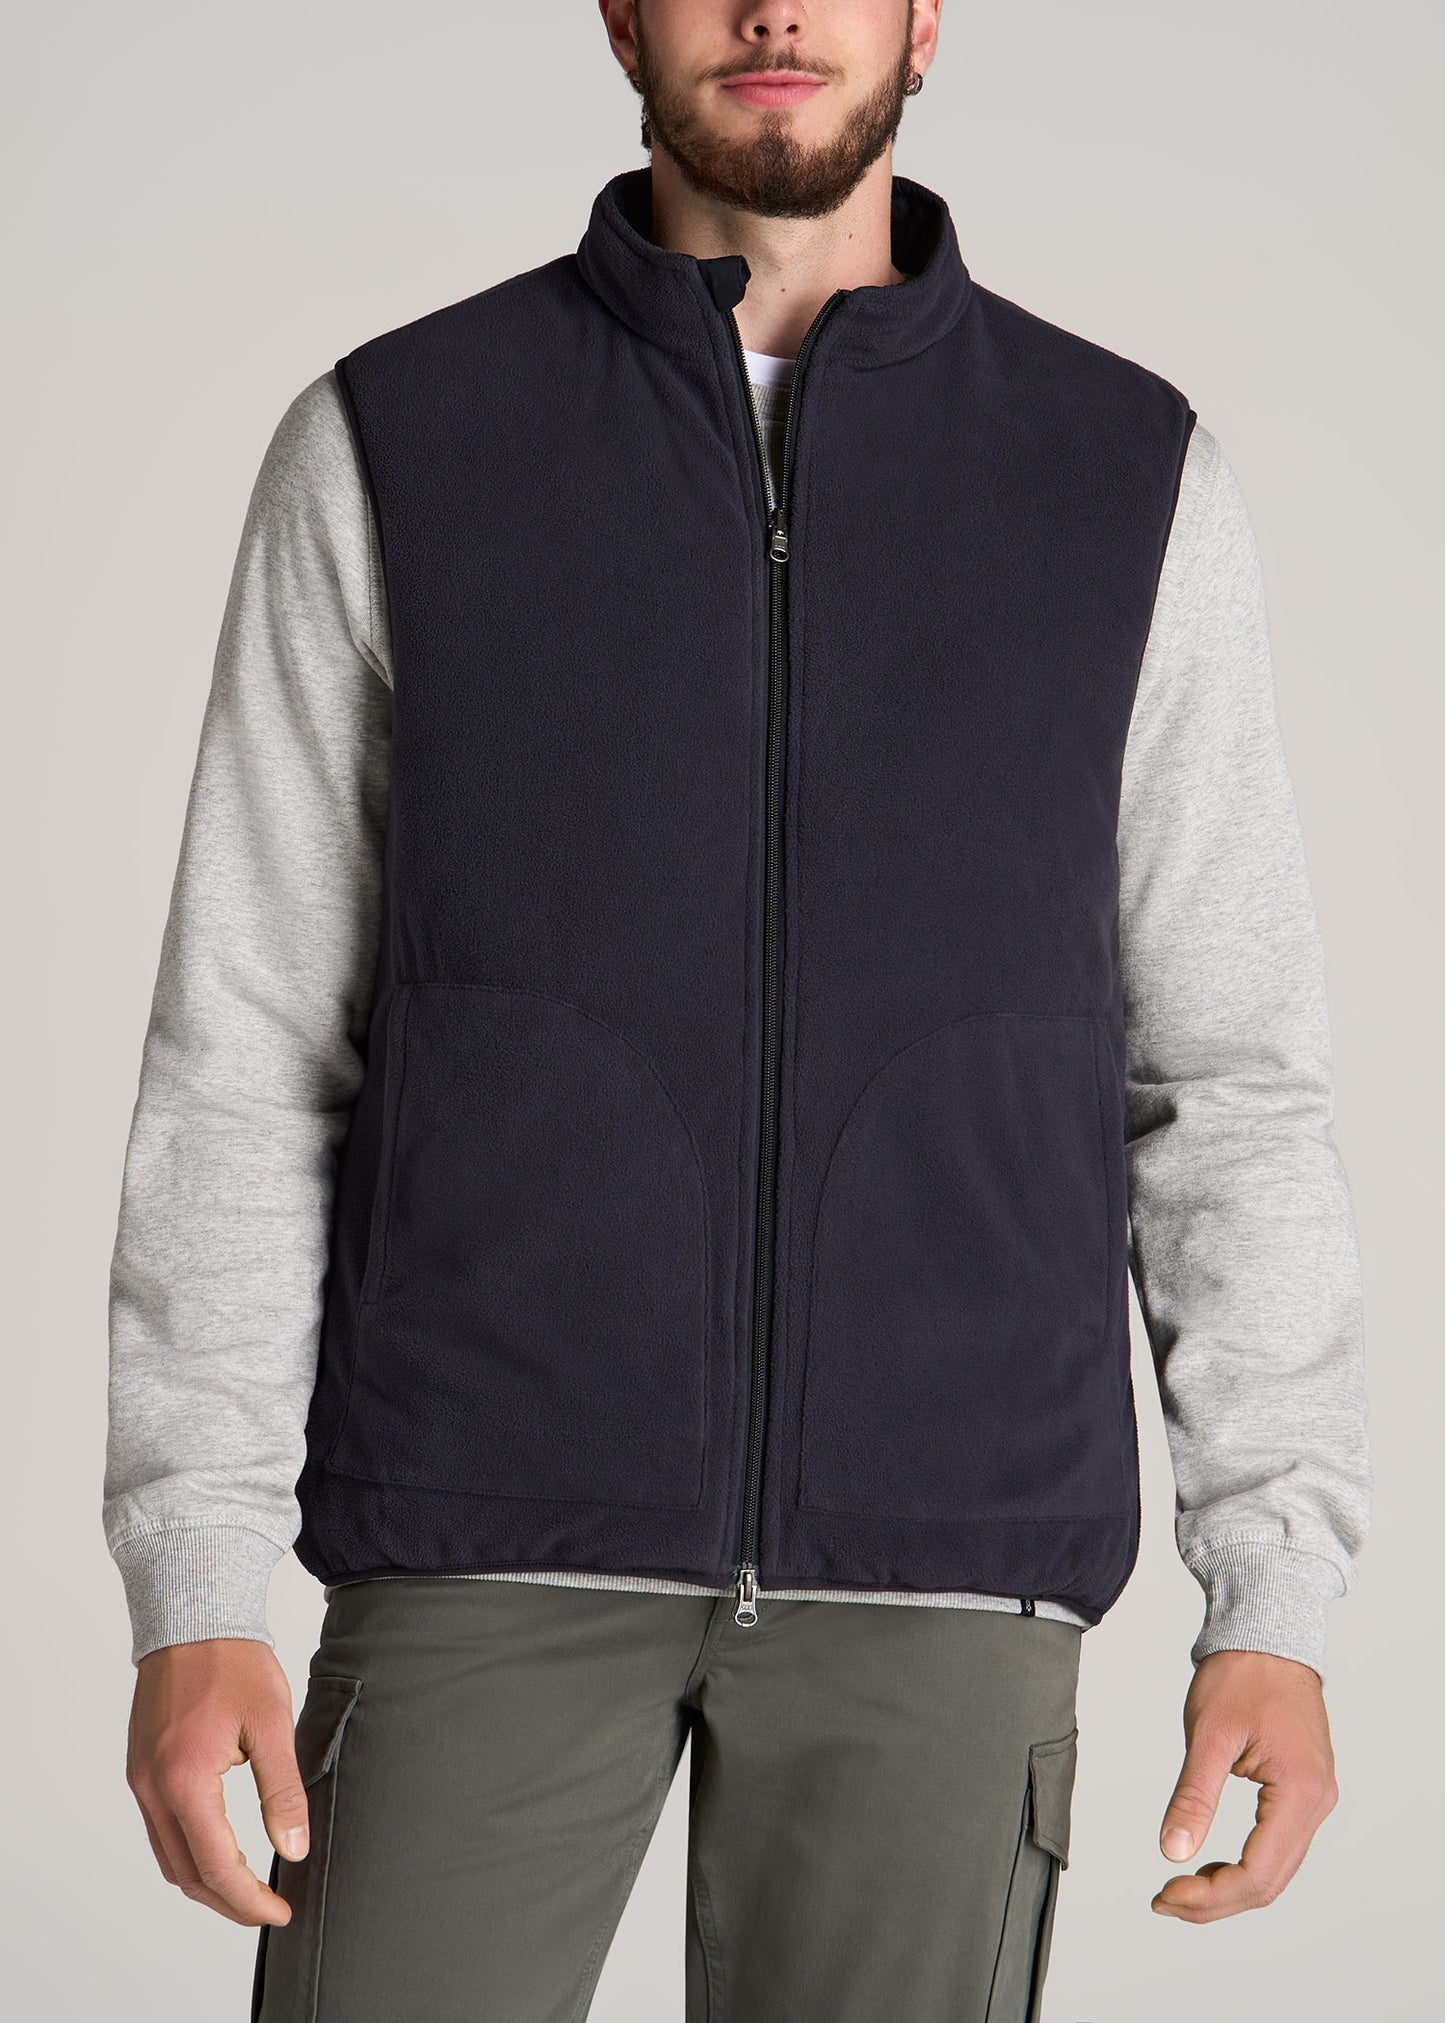 Quilted Reversible Tall Men's Vest